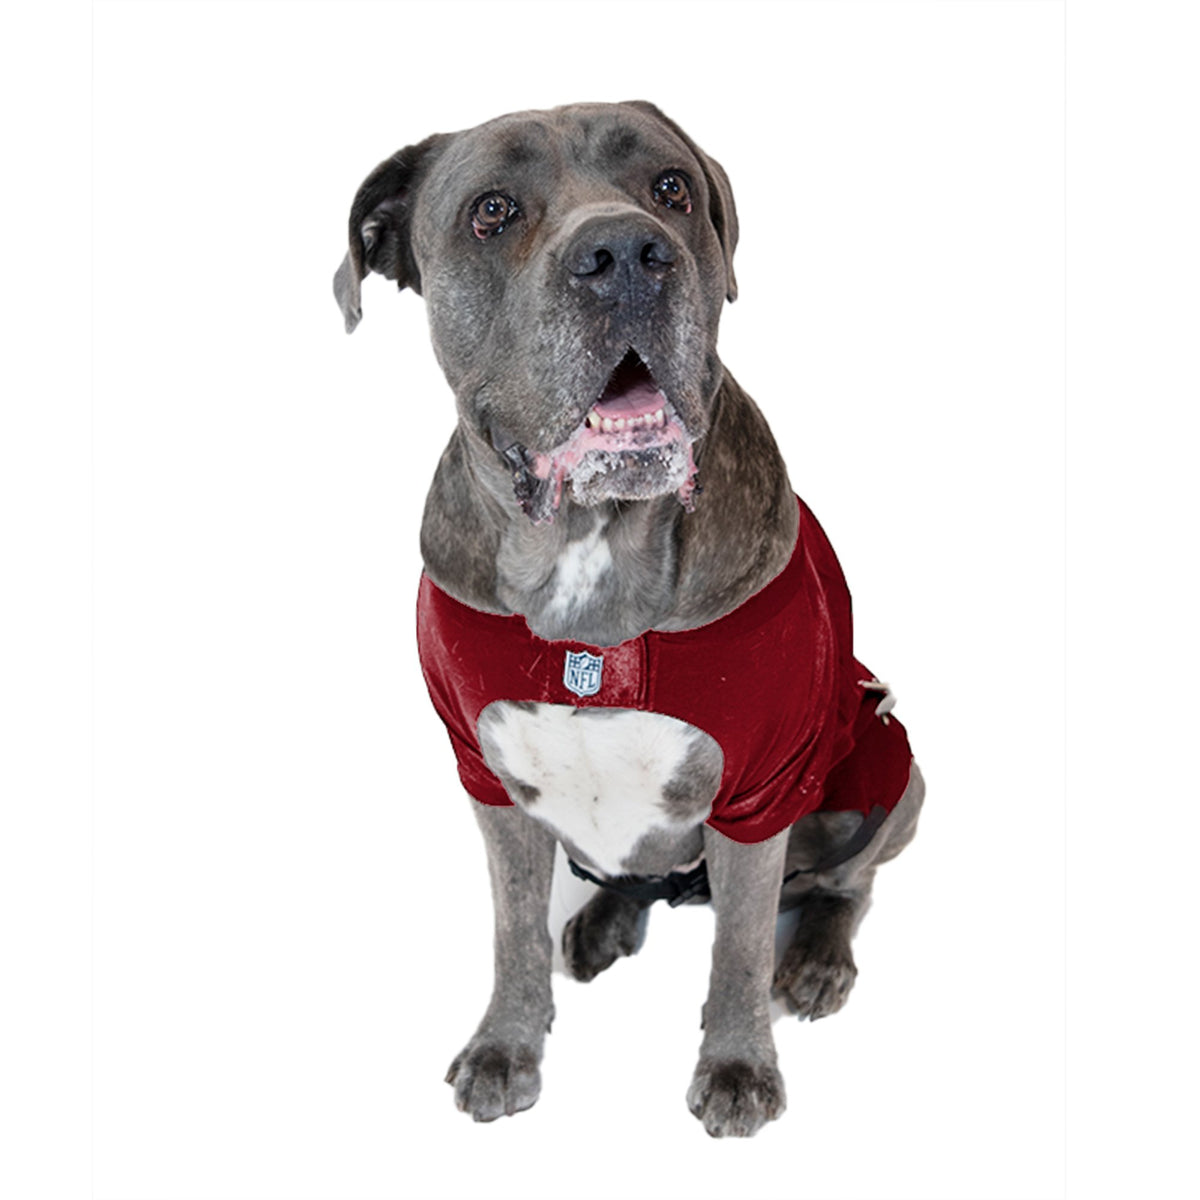 San Francisco 49ers Big Dog Stretch Jersey – 3 Red Rovers